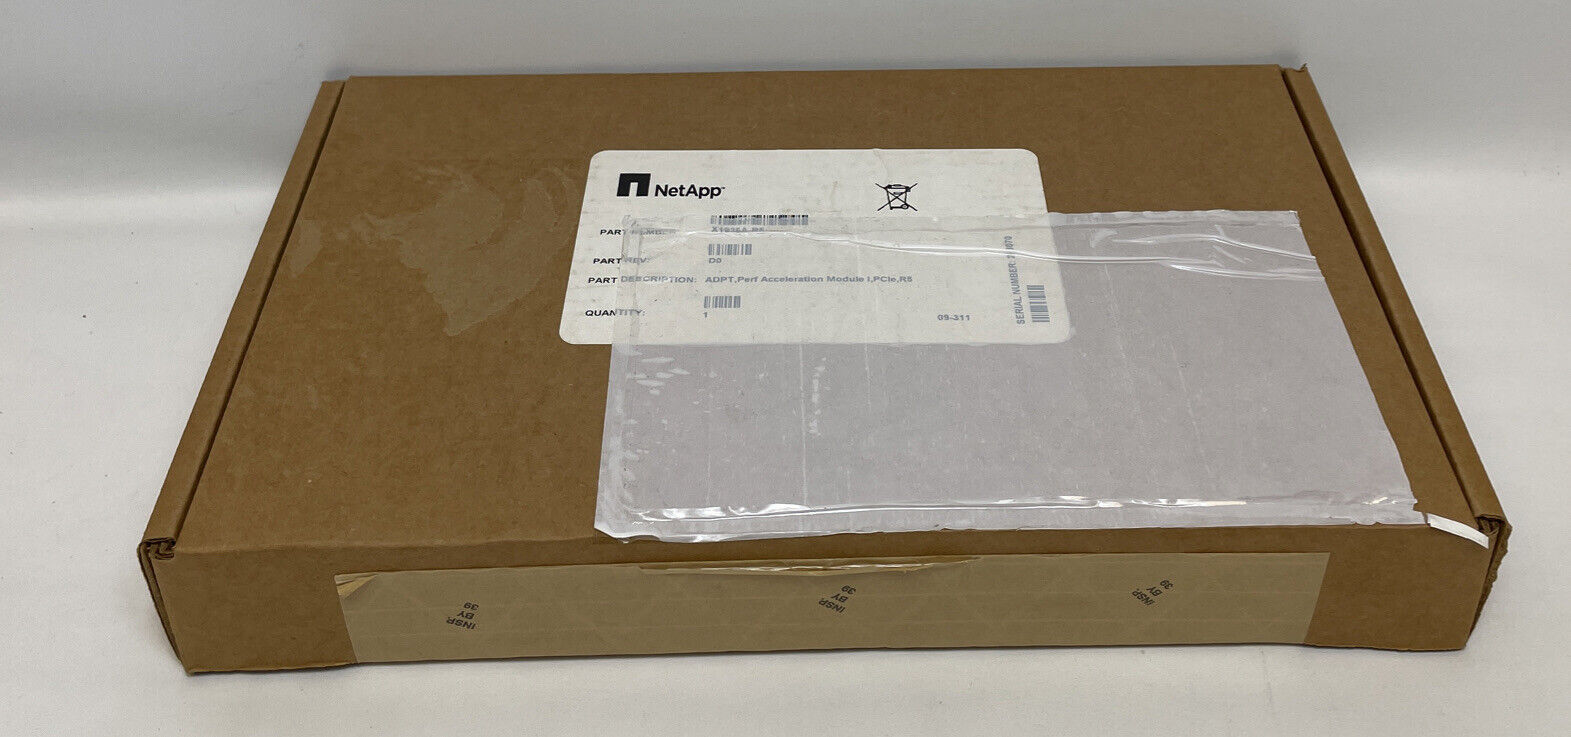 New NetApp X1936A-R5 Performance Acceleration Module I,PCIe,R5 - Factory Sealed 